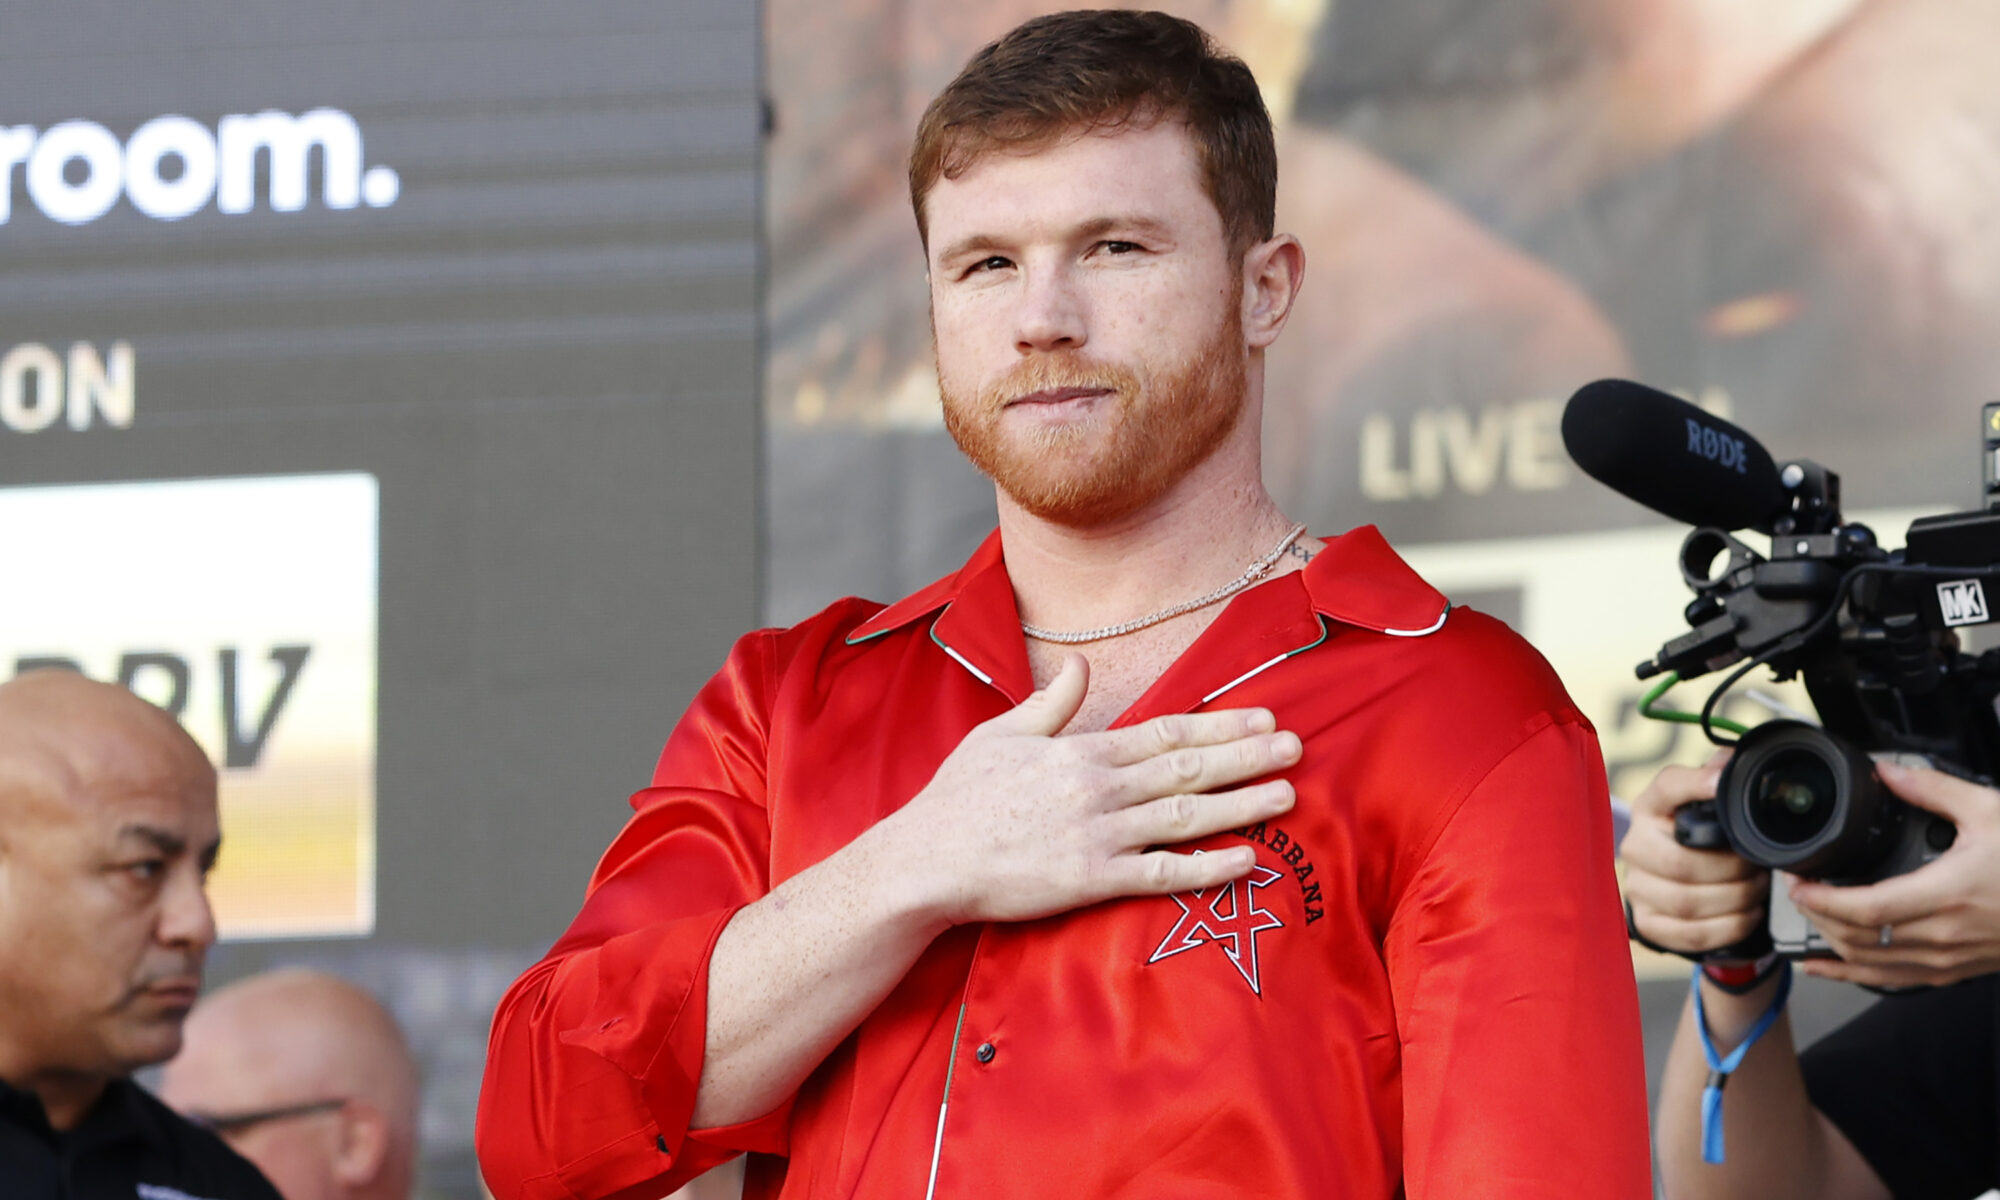 Canelo Alvarez apologizes to Lionel Messi, Argentina over attacks: ‘I got carried away by the passion’